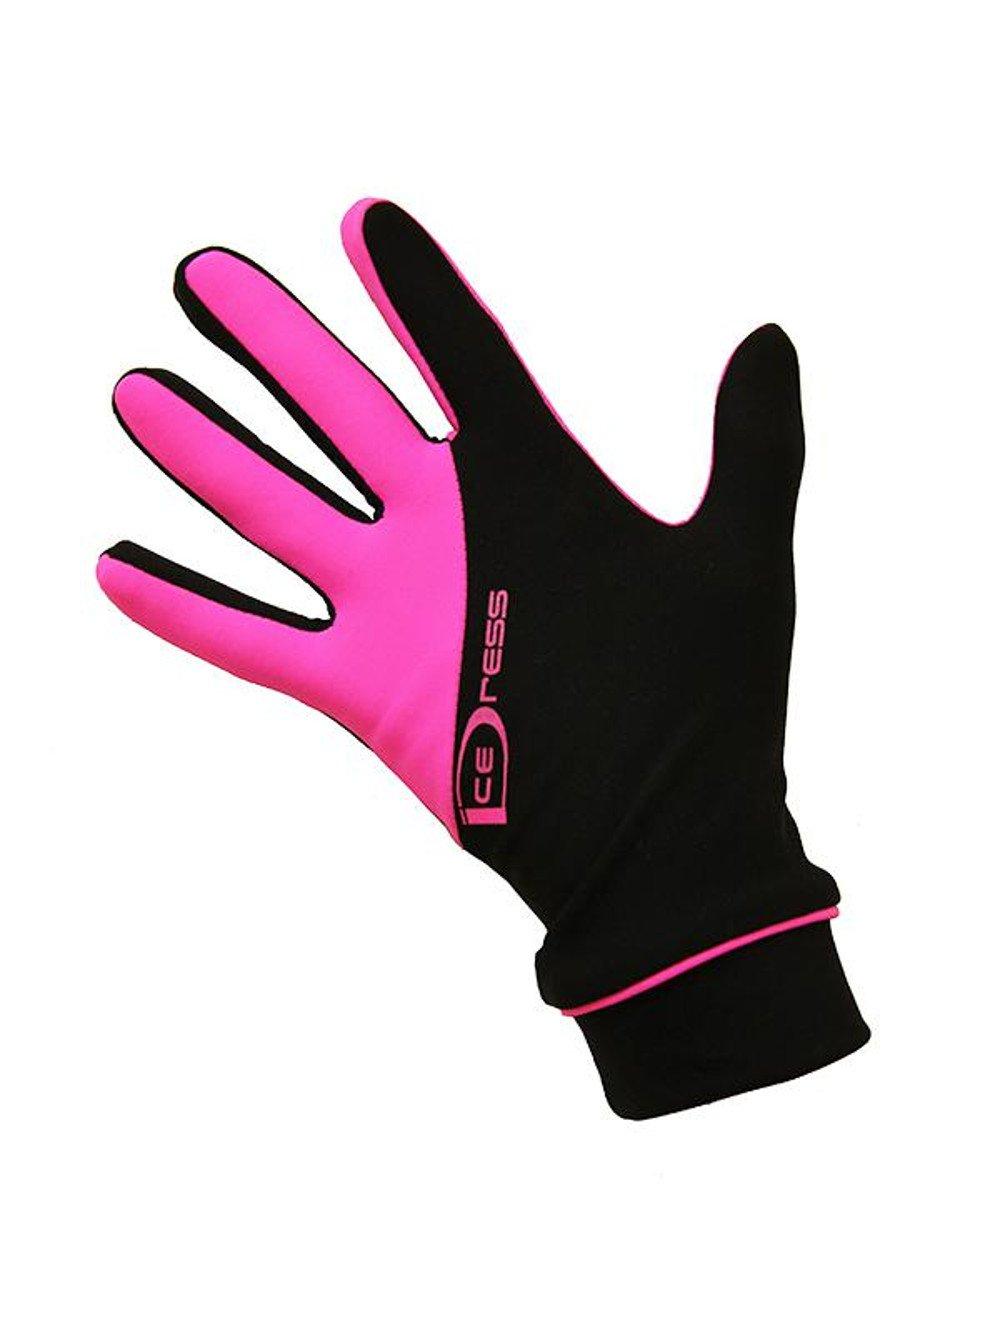 IceDress Two Color Thermal Figure Skating Gloves Sport Balck and